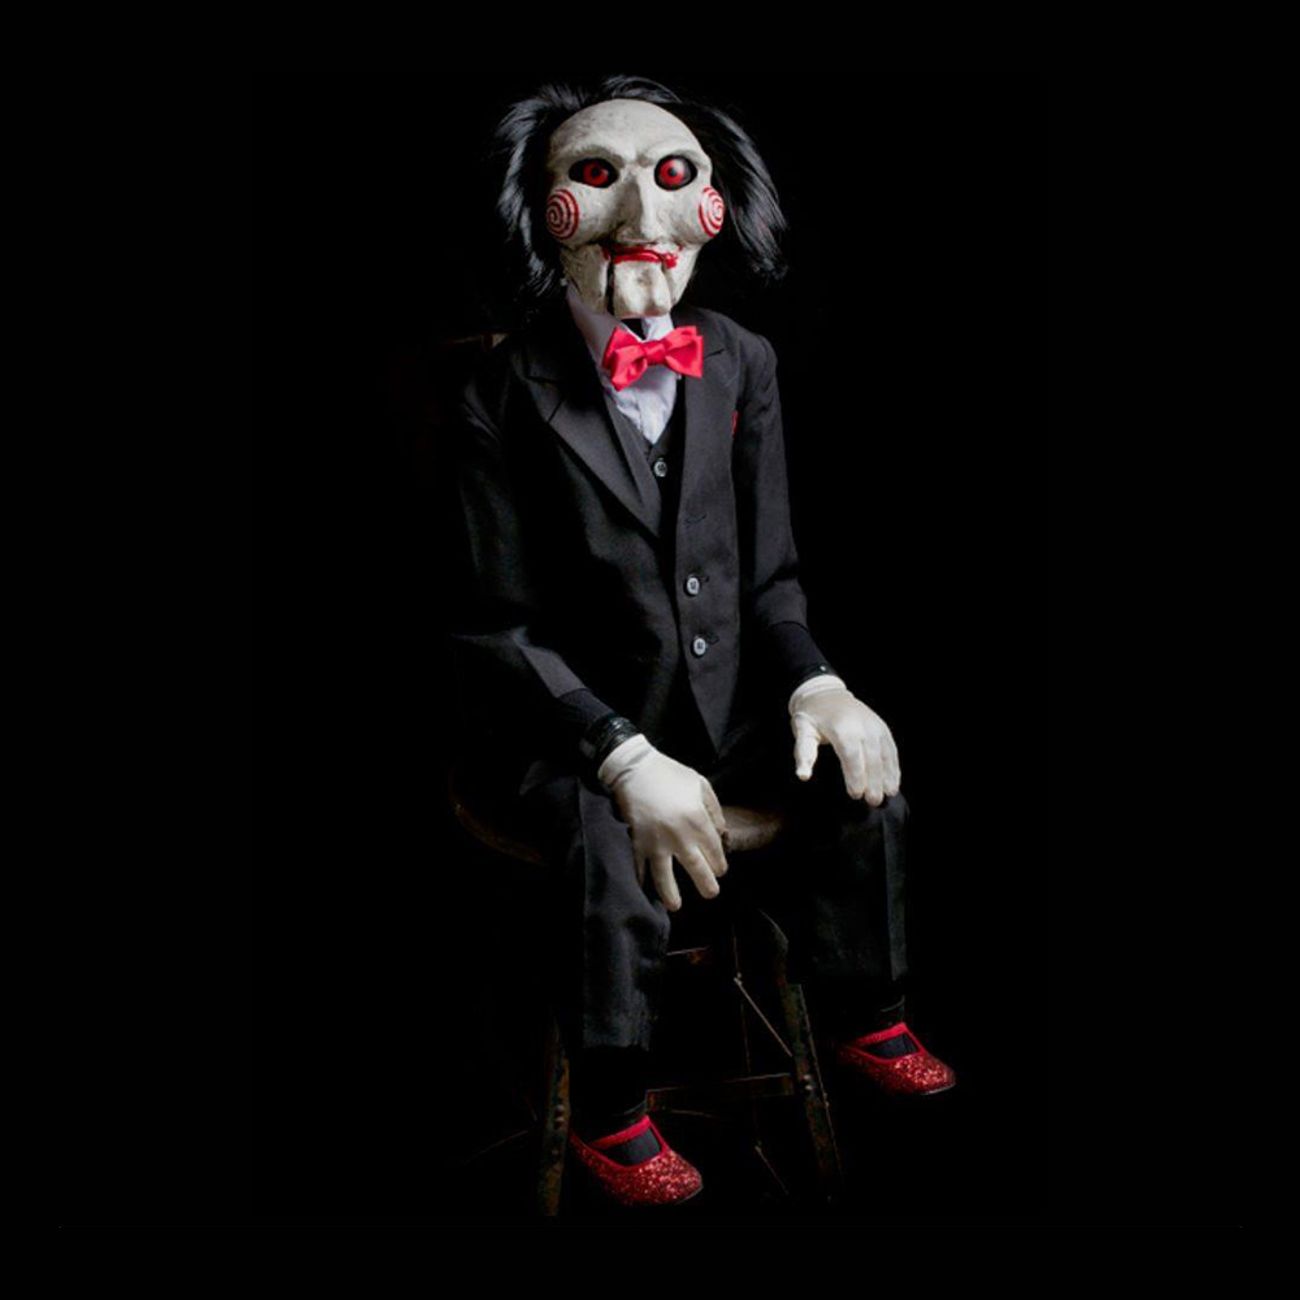 saw-billy-puppet-prop-2